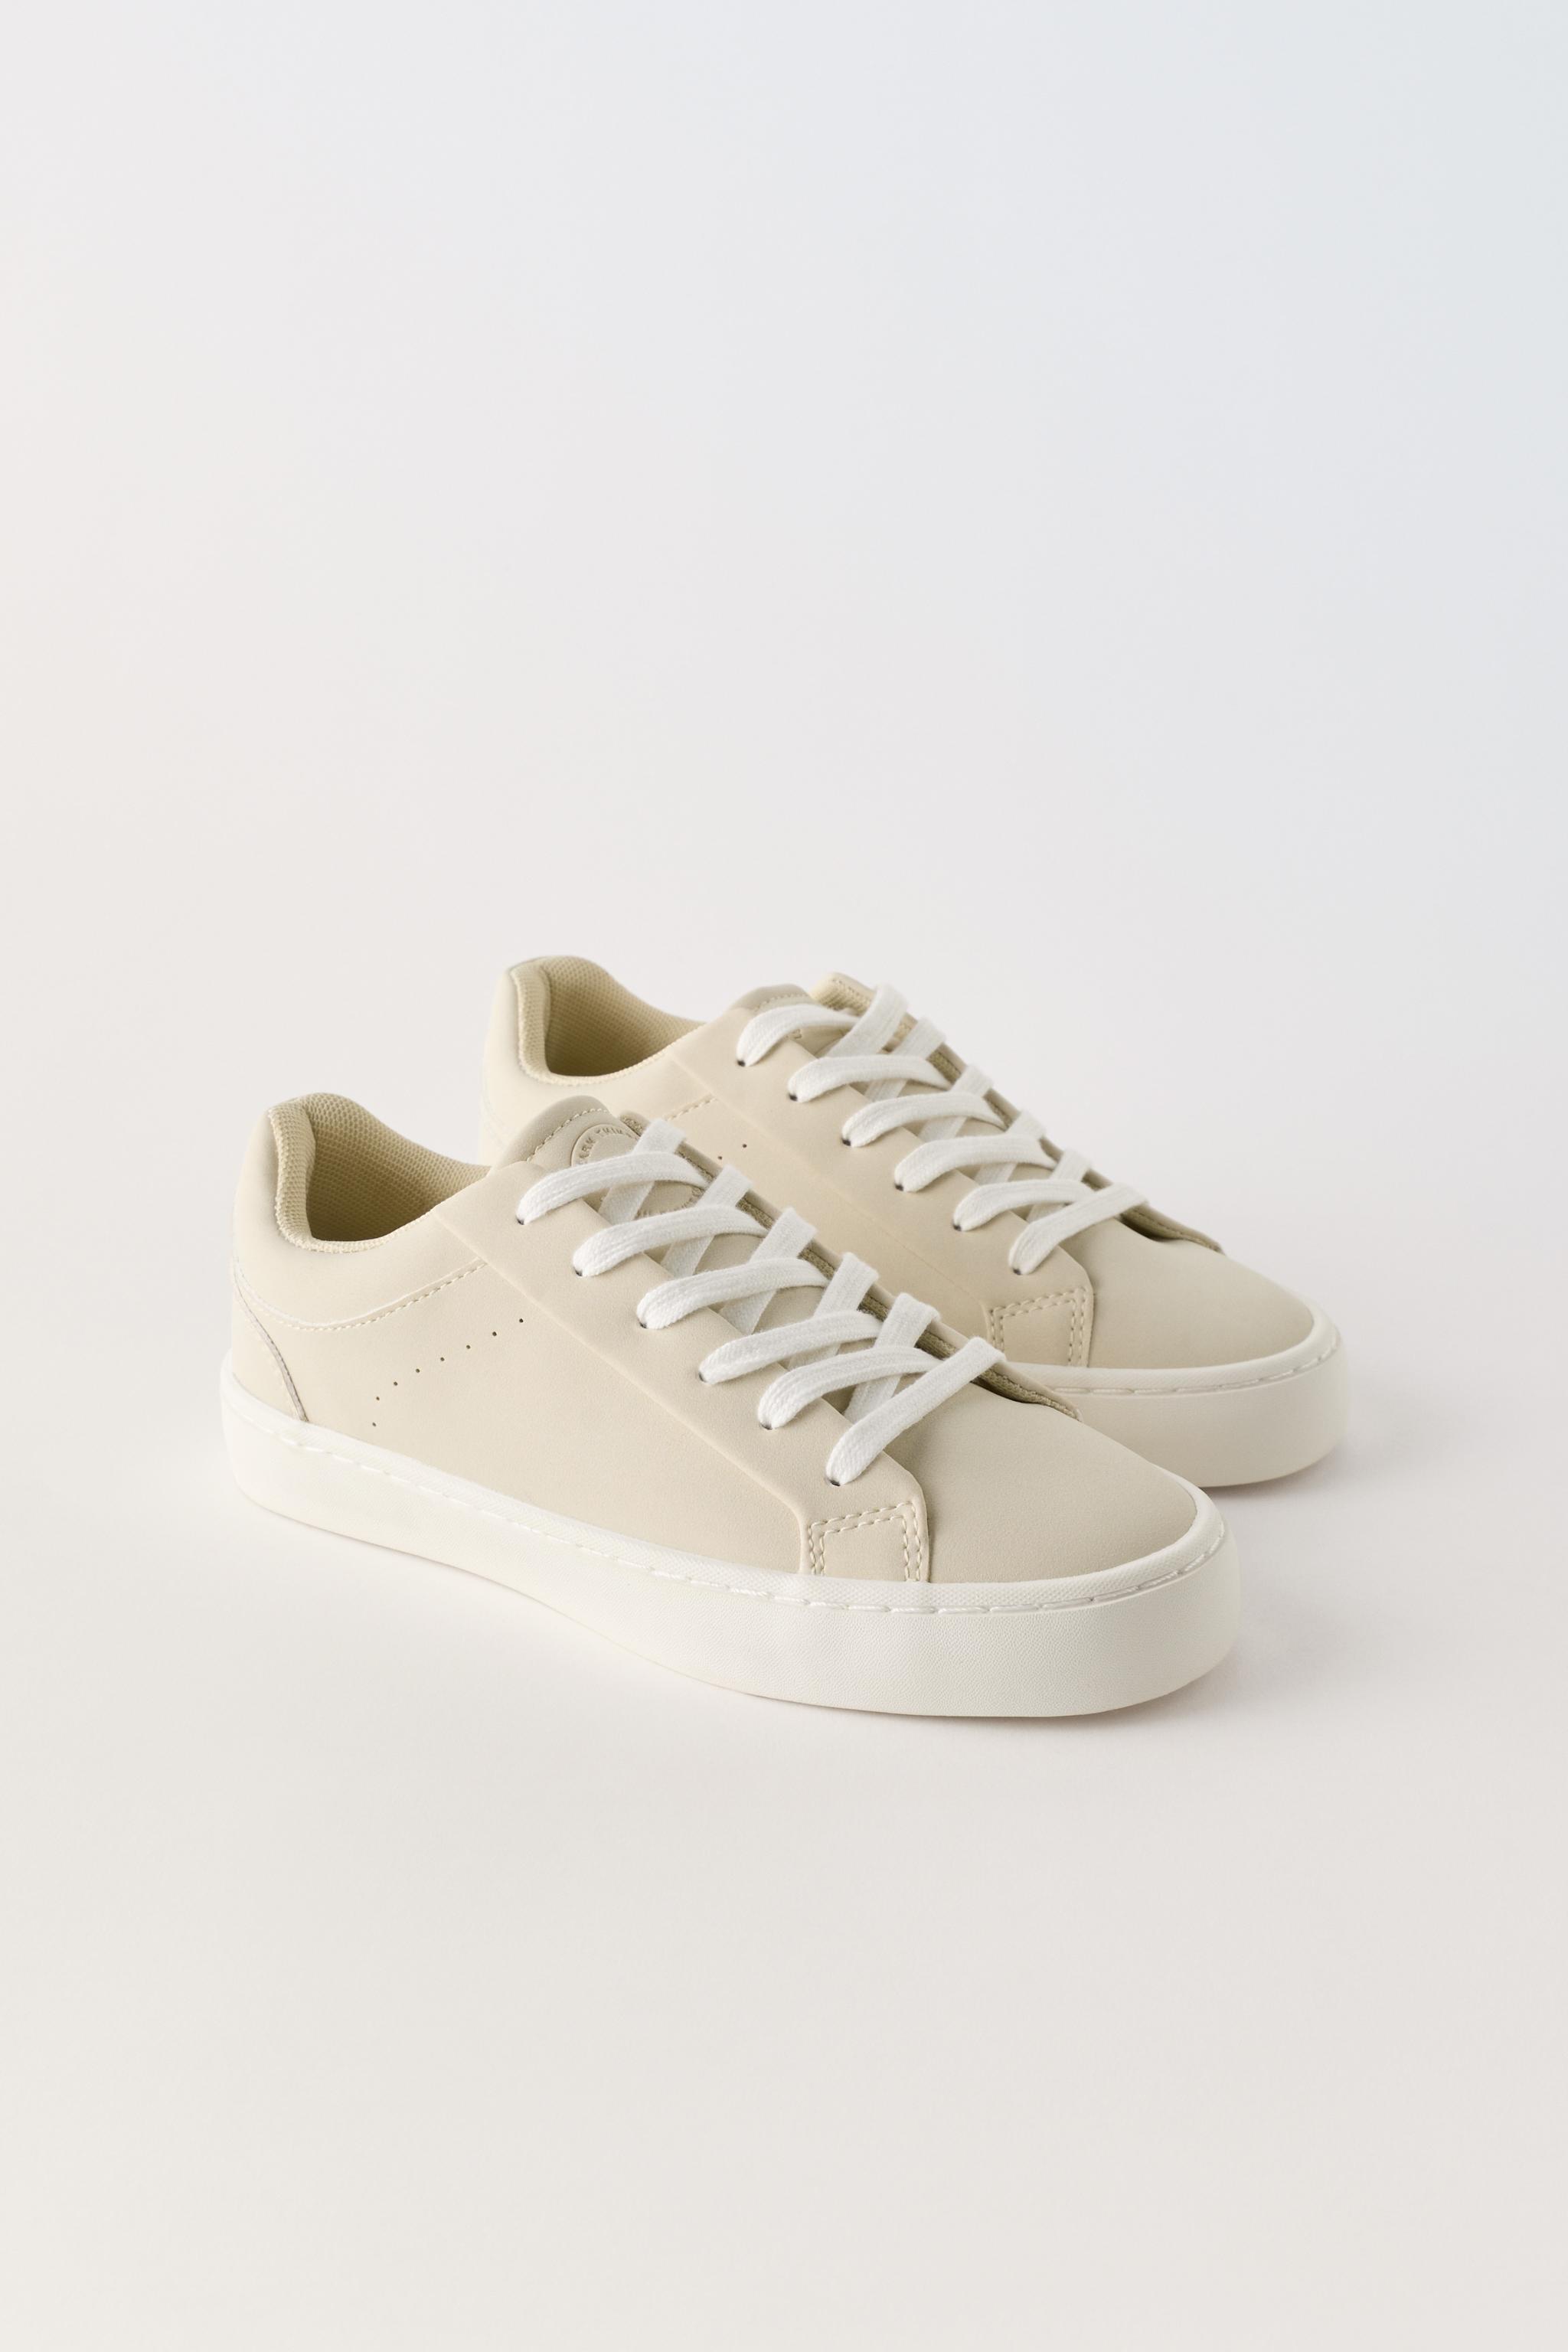 ZARA MINIMALIST TOPSTITCHED SNEAKERS: WHITE – Your Daily Store Online